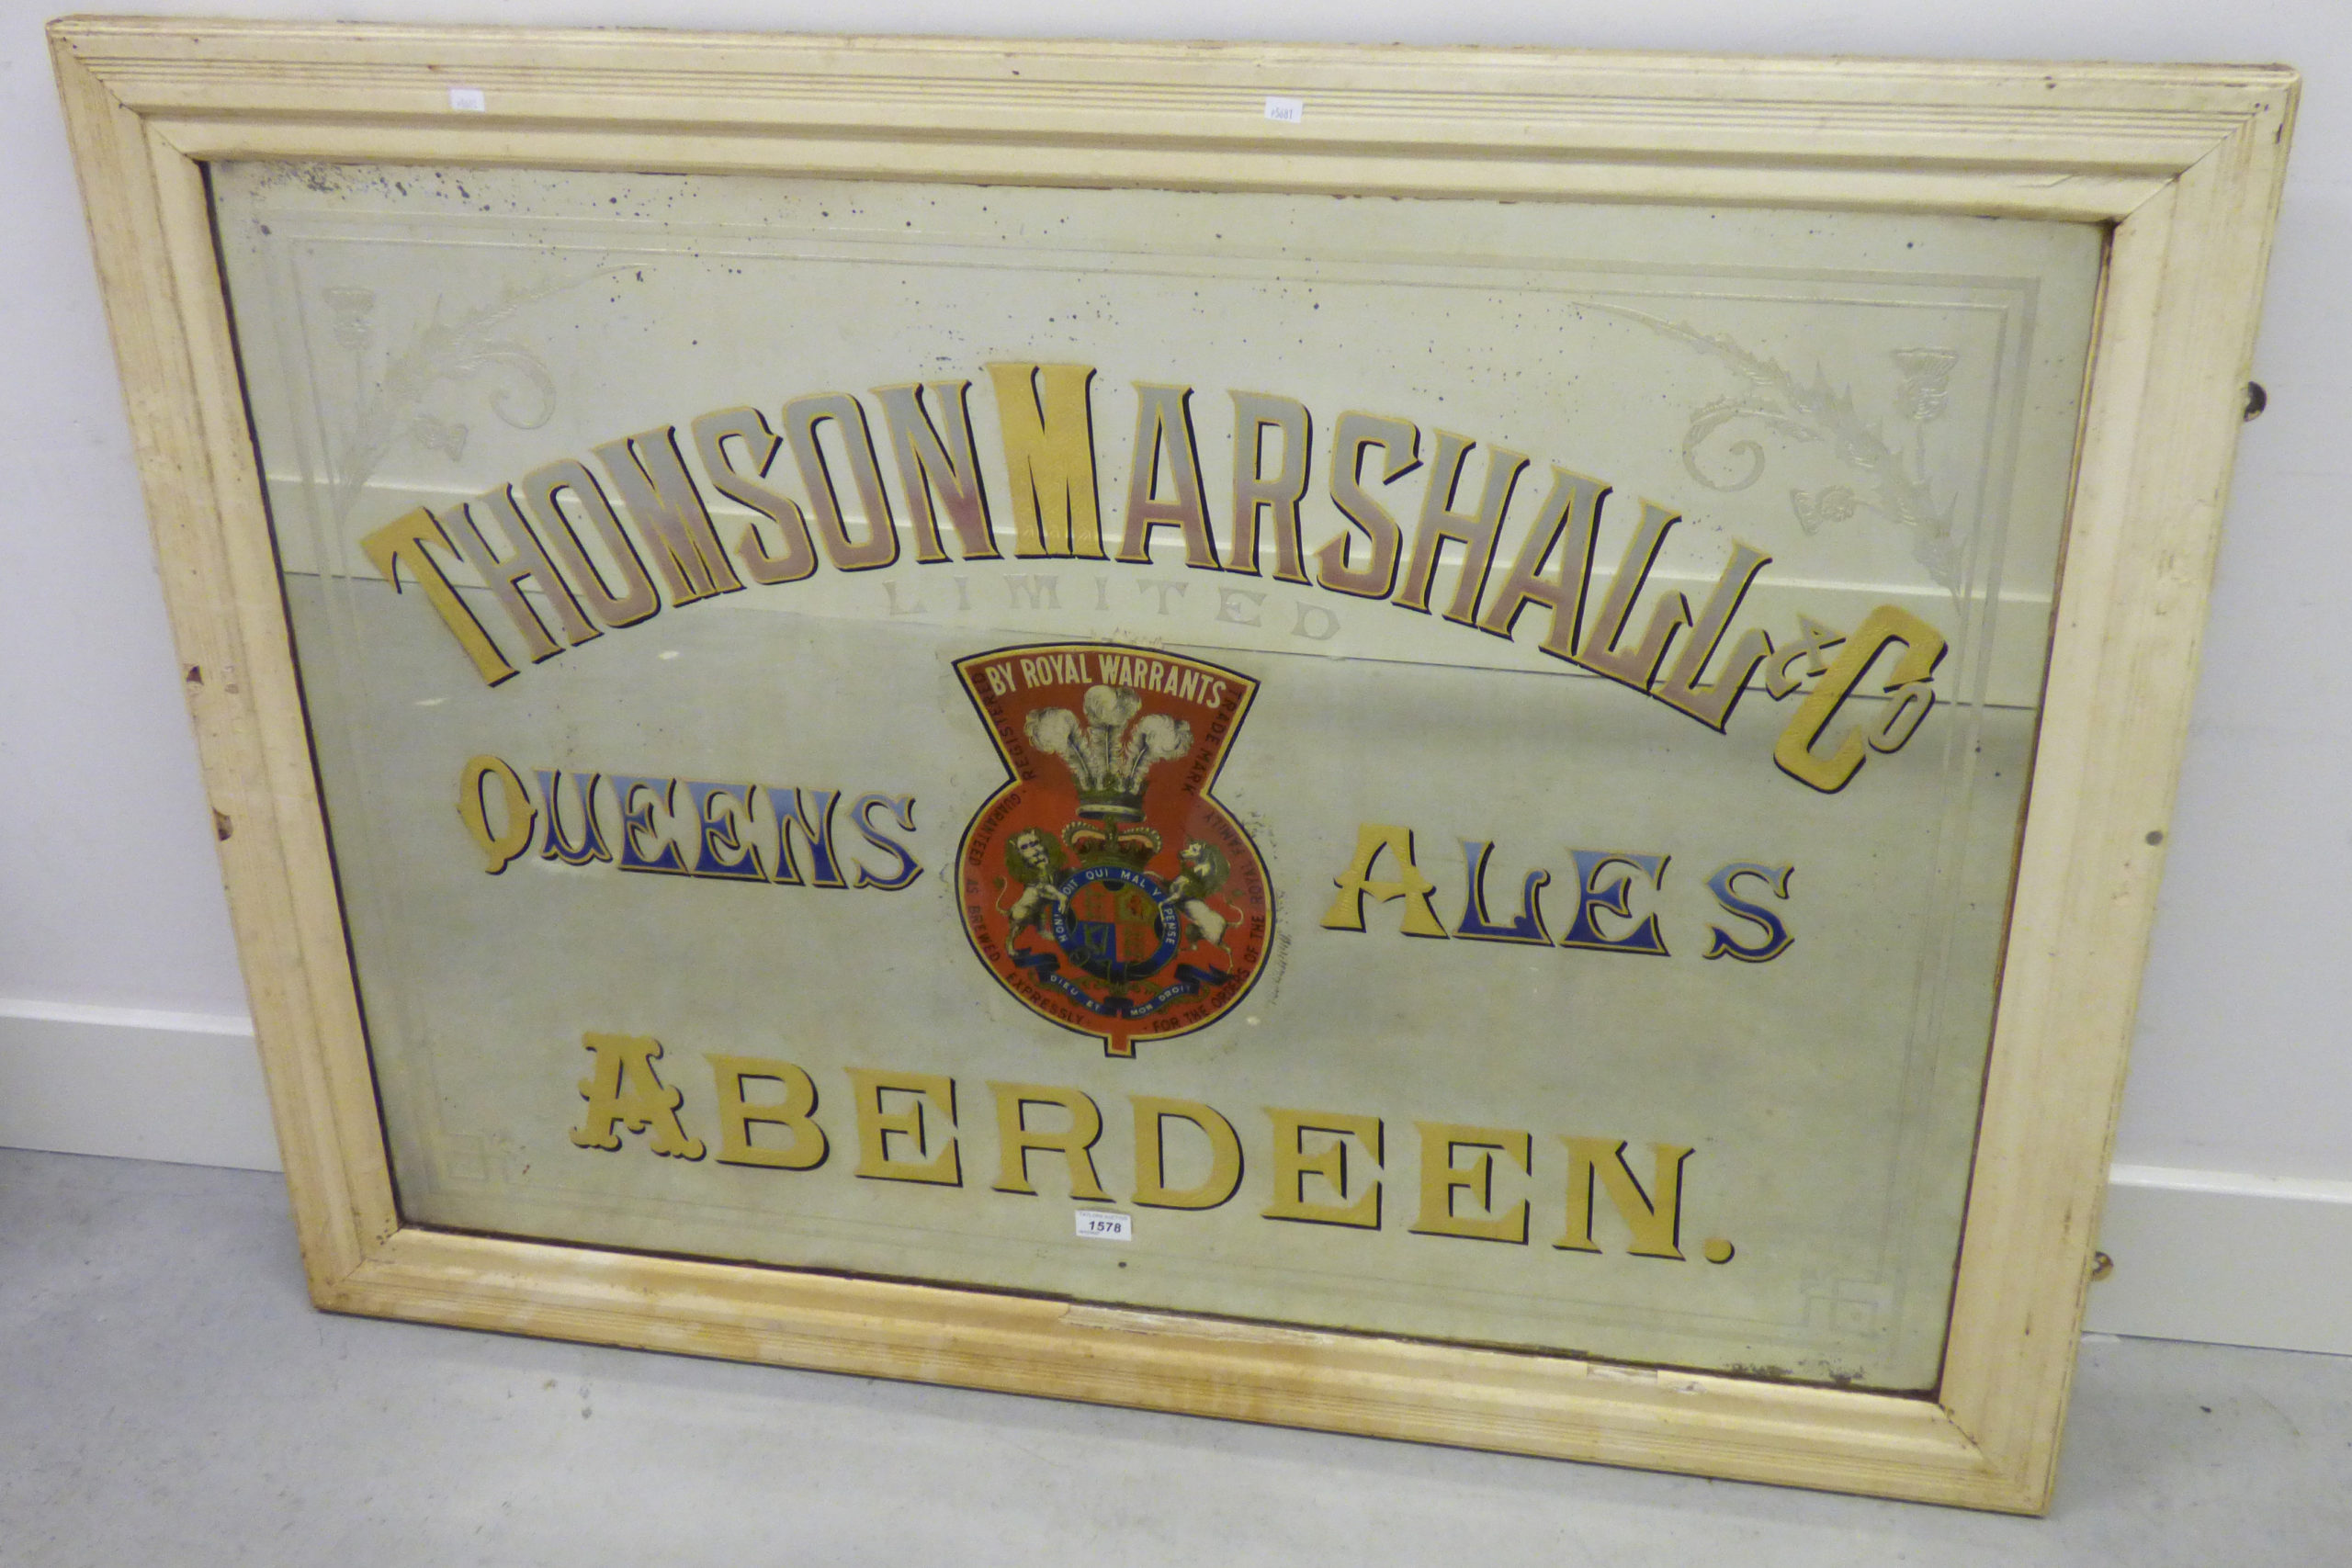 The Thomson, Marshall & Co mirror is expected to fetch several hundred pounds at auction.